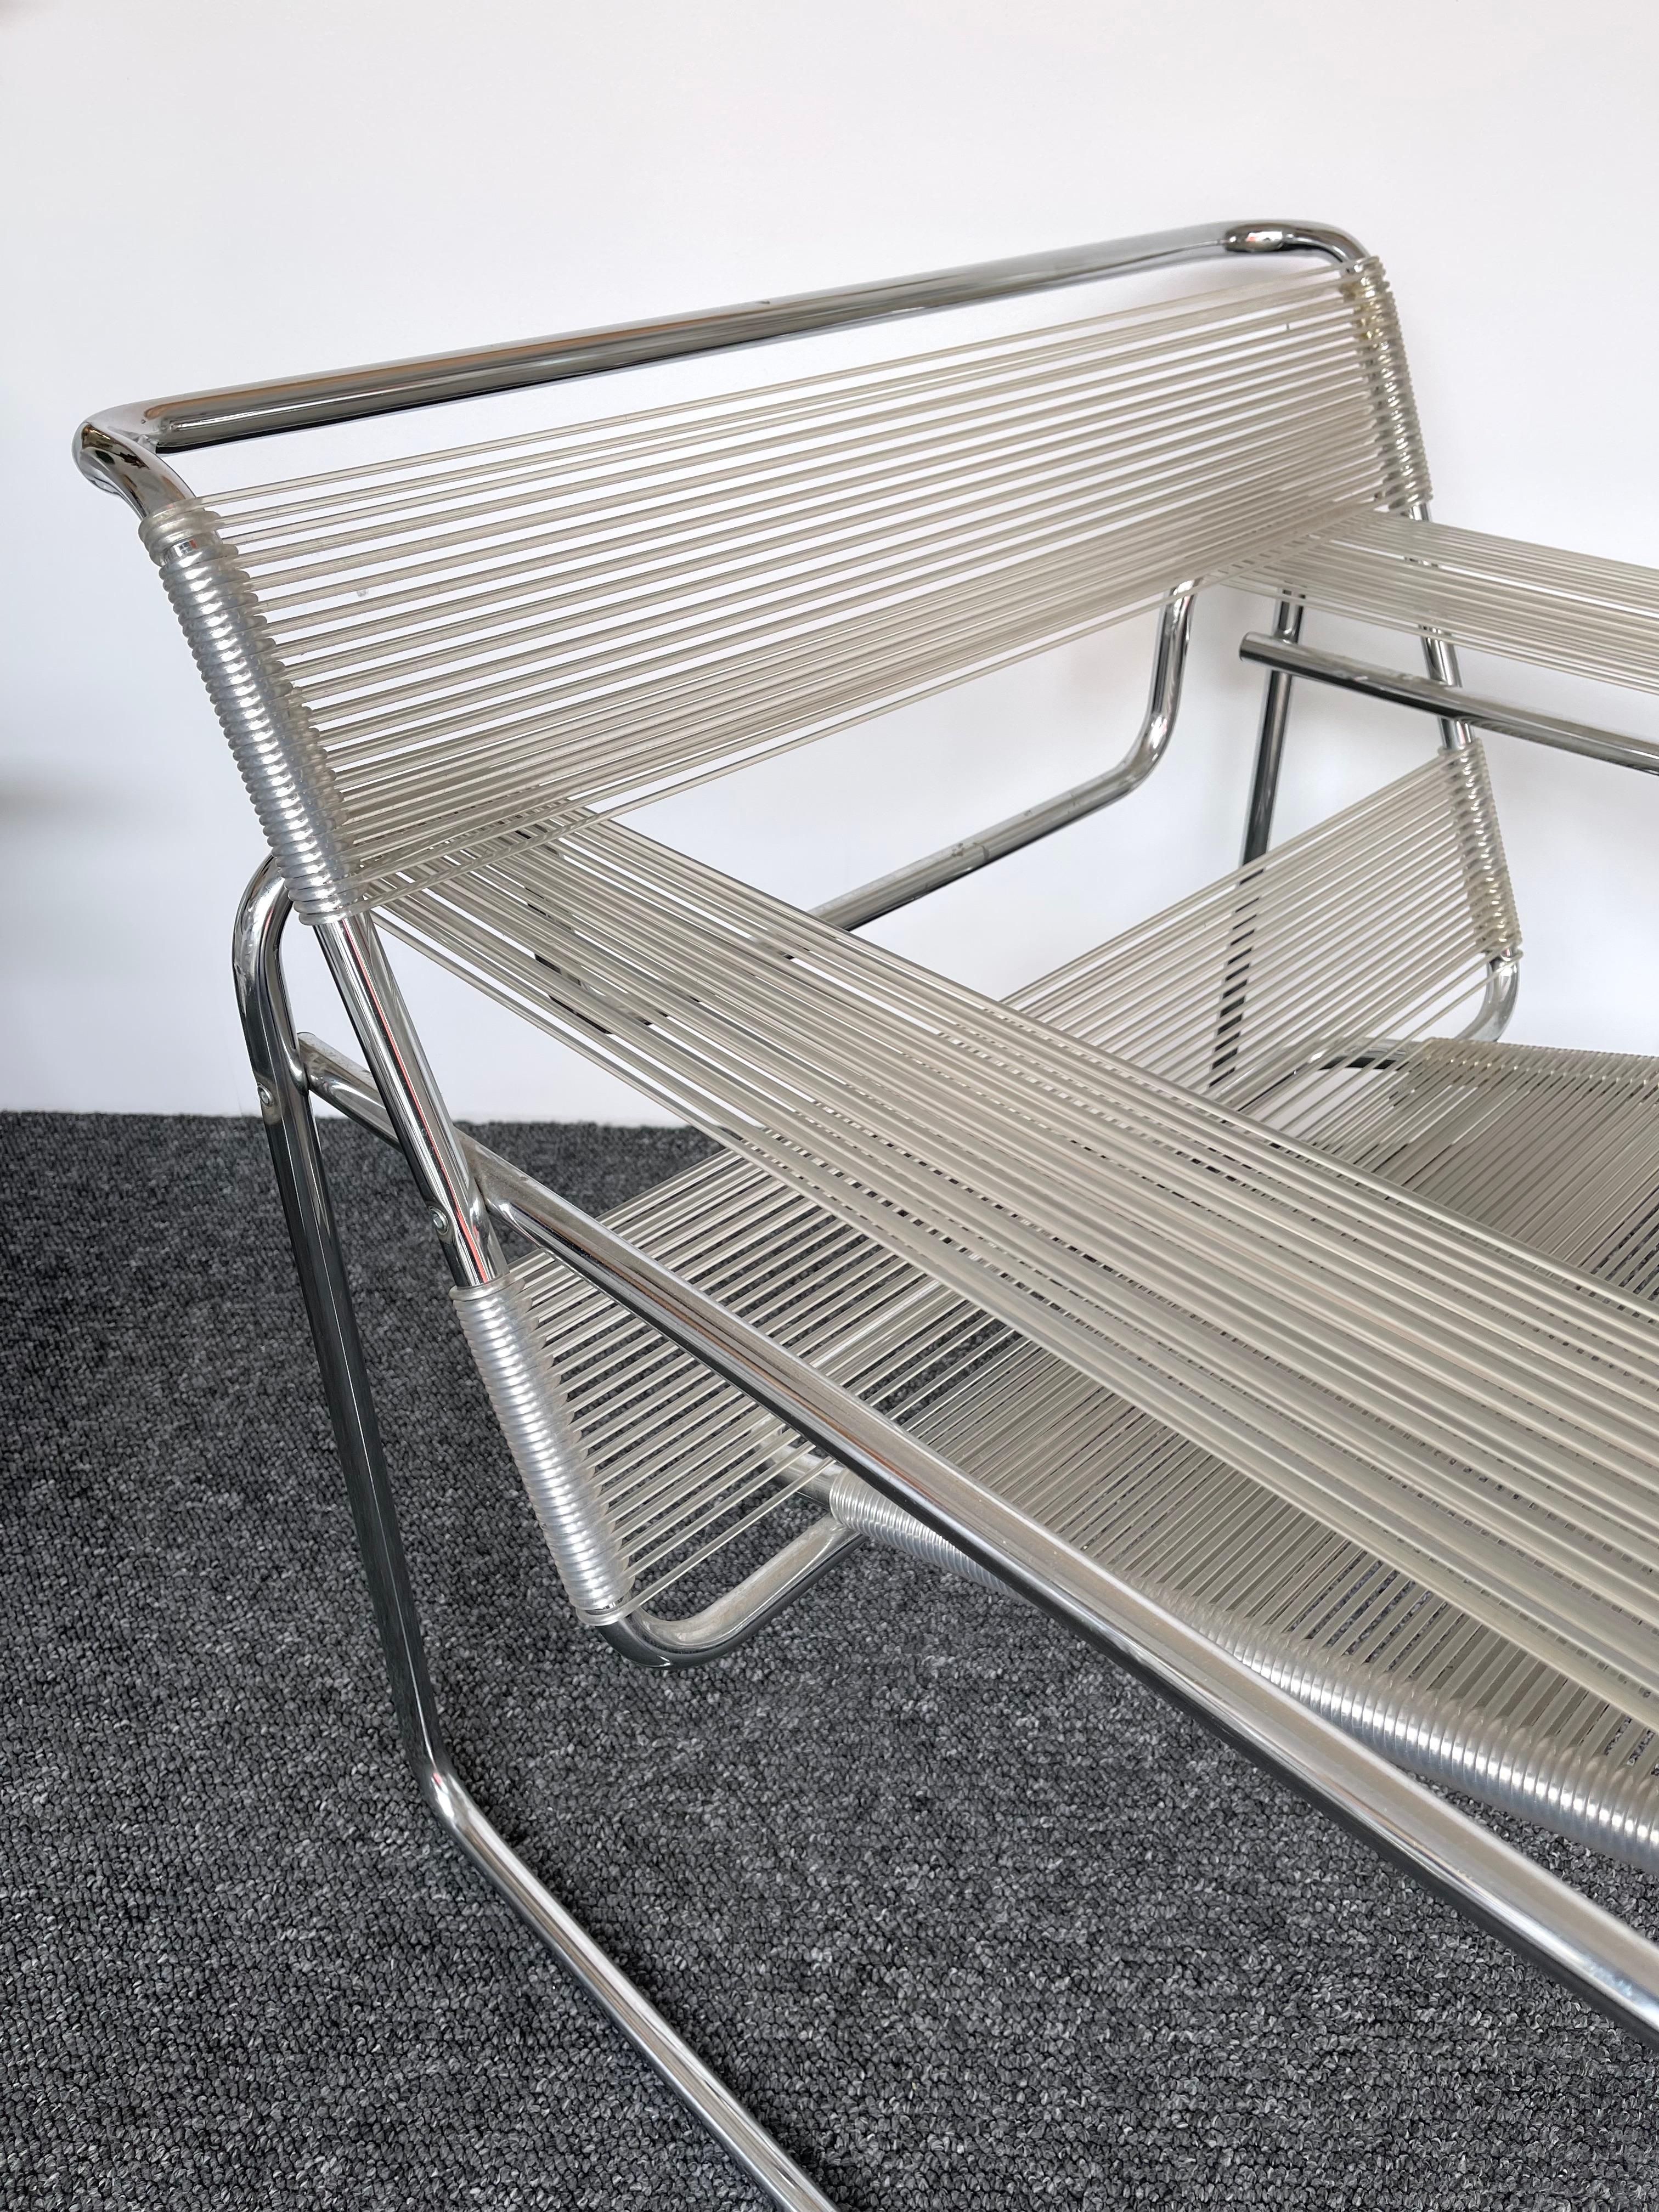 Rare Mid-Century Modern Space Age pair of iconic Wassily armchairs or lounge chairs in a Spaghetti version in metal chrome and rubber seating. An edition late 1970s beginning 1980s. Famous design like, Knoll, Gio Ponti, Italian design, Gianfranco